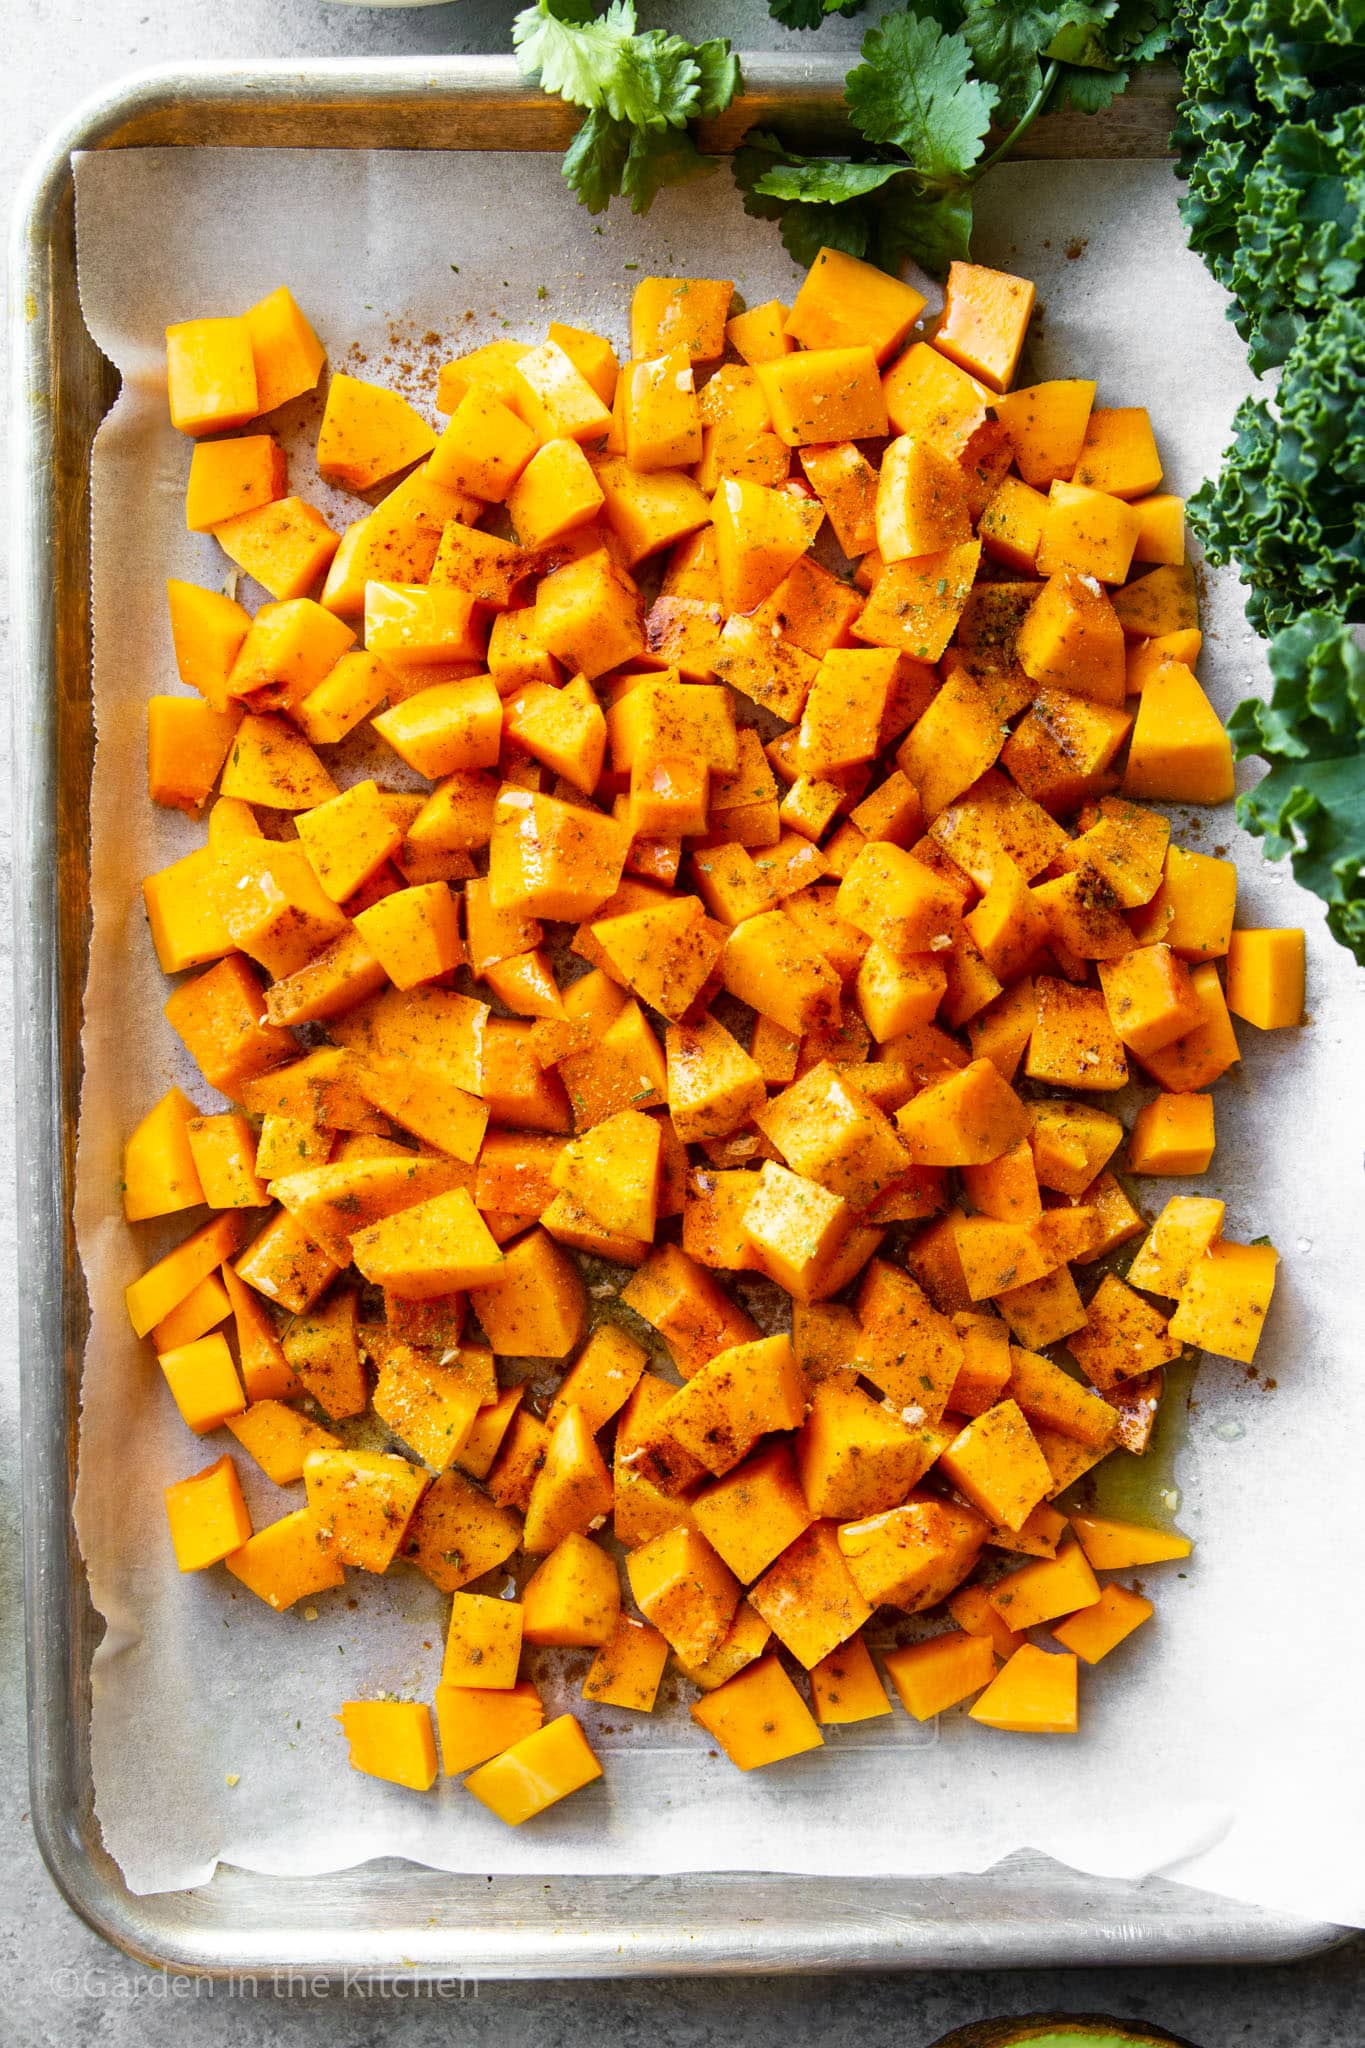 Butternut squash cubed and seasoned with cinnamon on a sheet pan with parchment paper. 